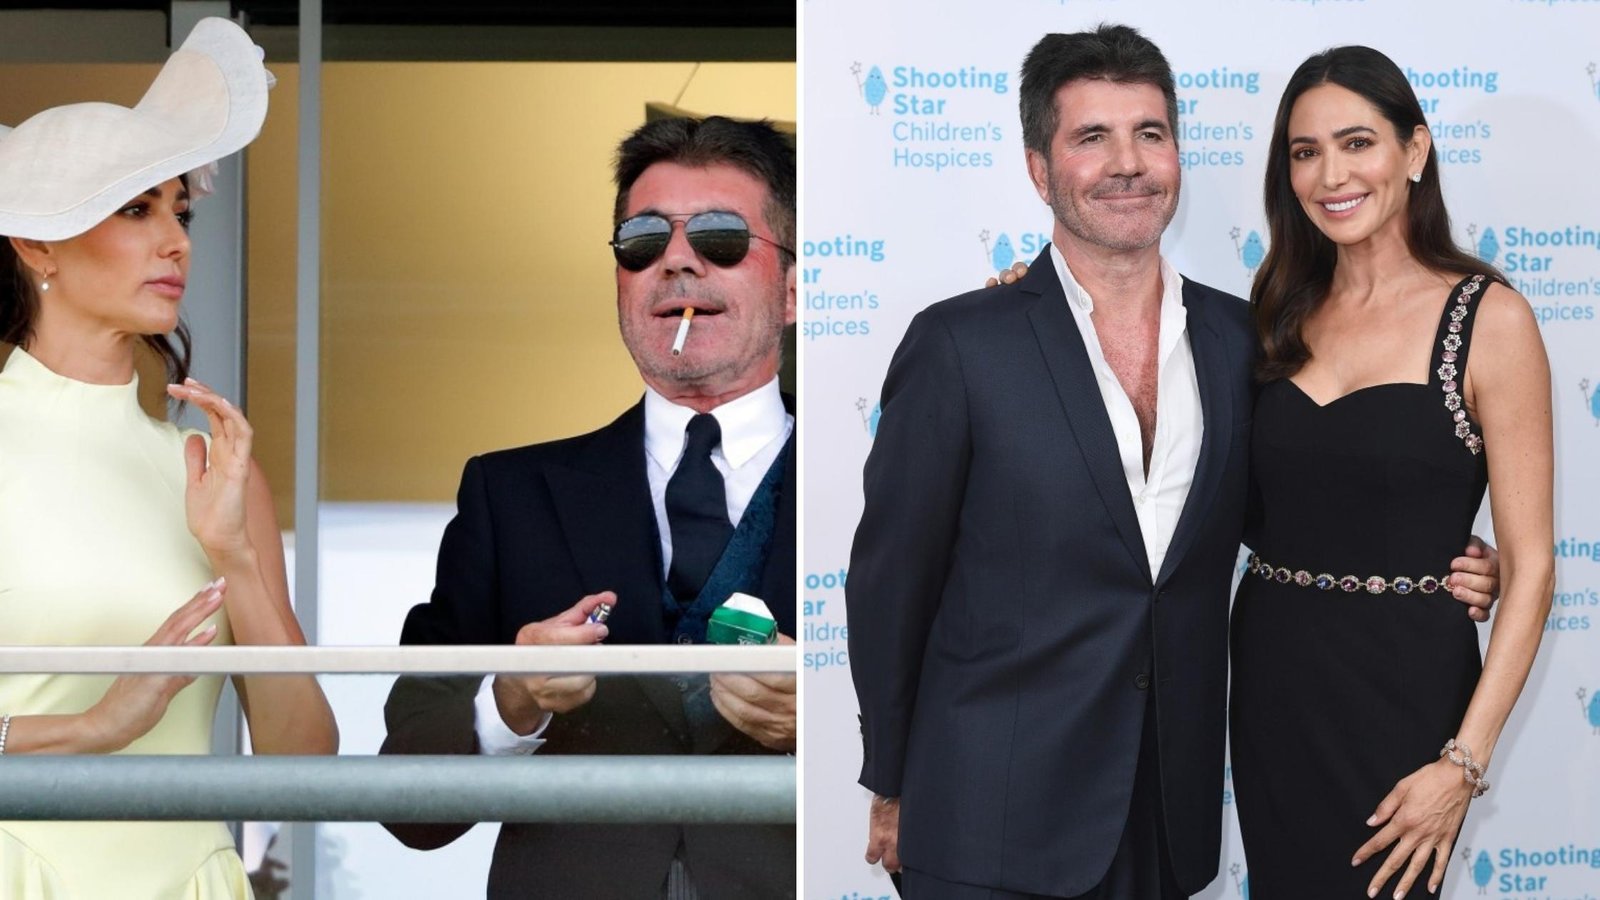 Simon Cowell Engaged To Lauren Silverman